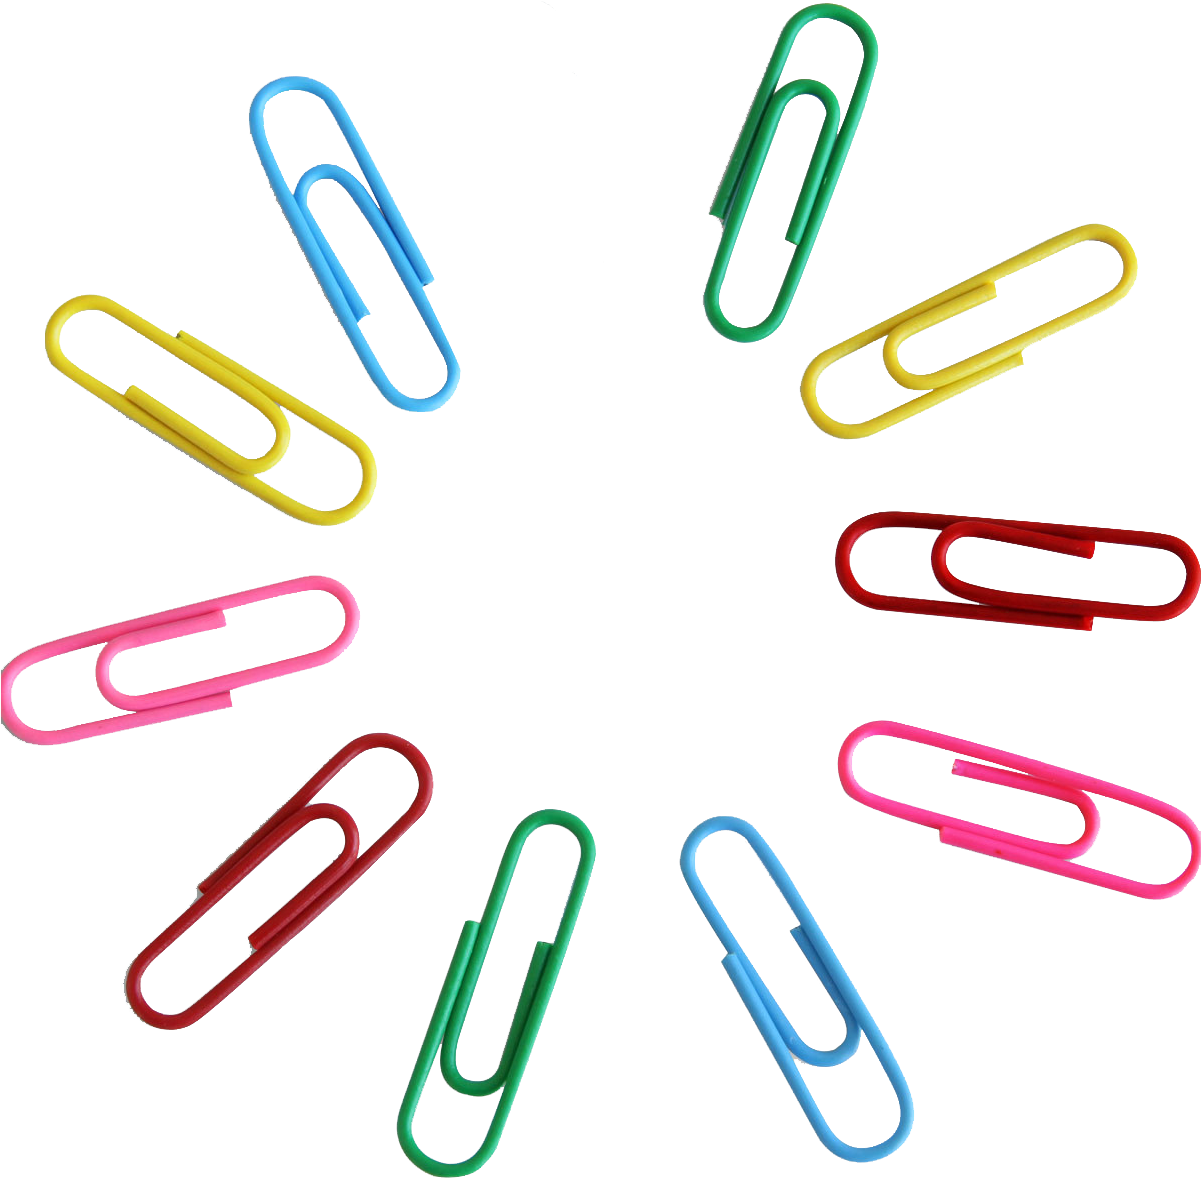 Paper Clip Adhesive Tape Binder Clip Office Supplies - Colorful Paperclips (1200x1200)